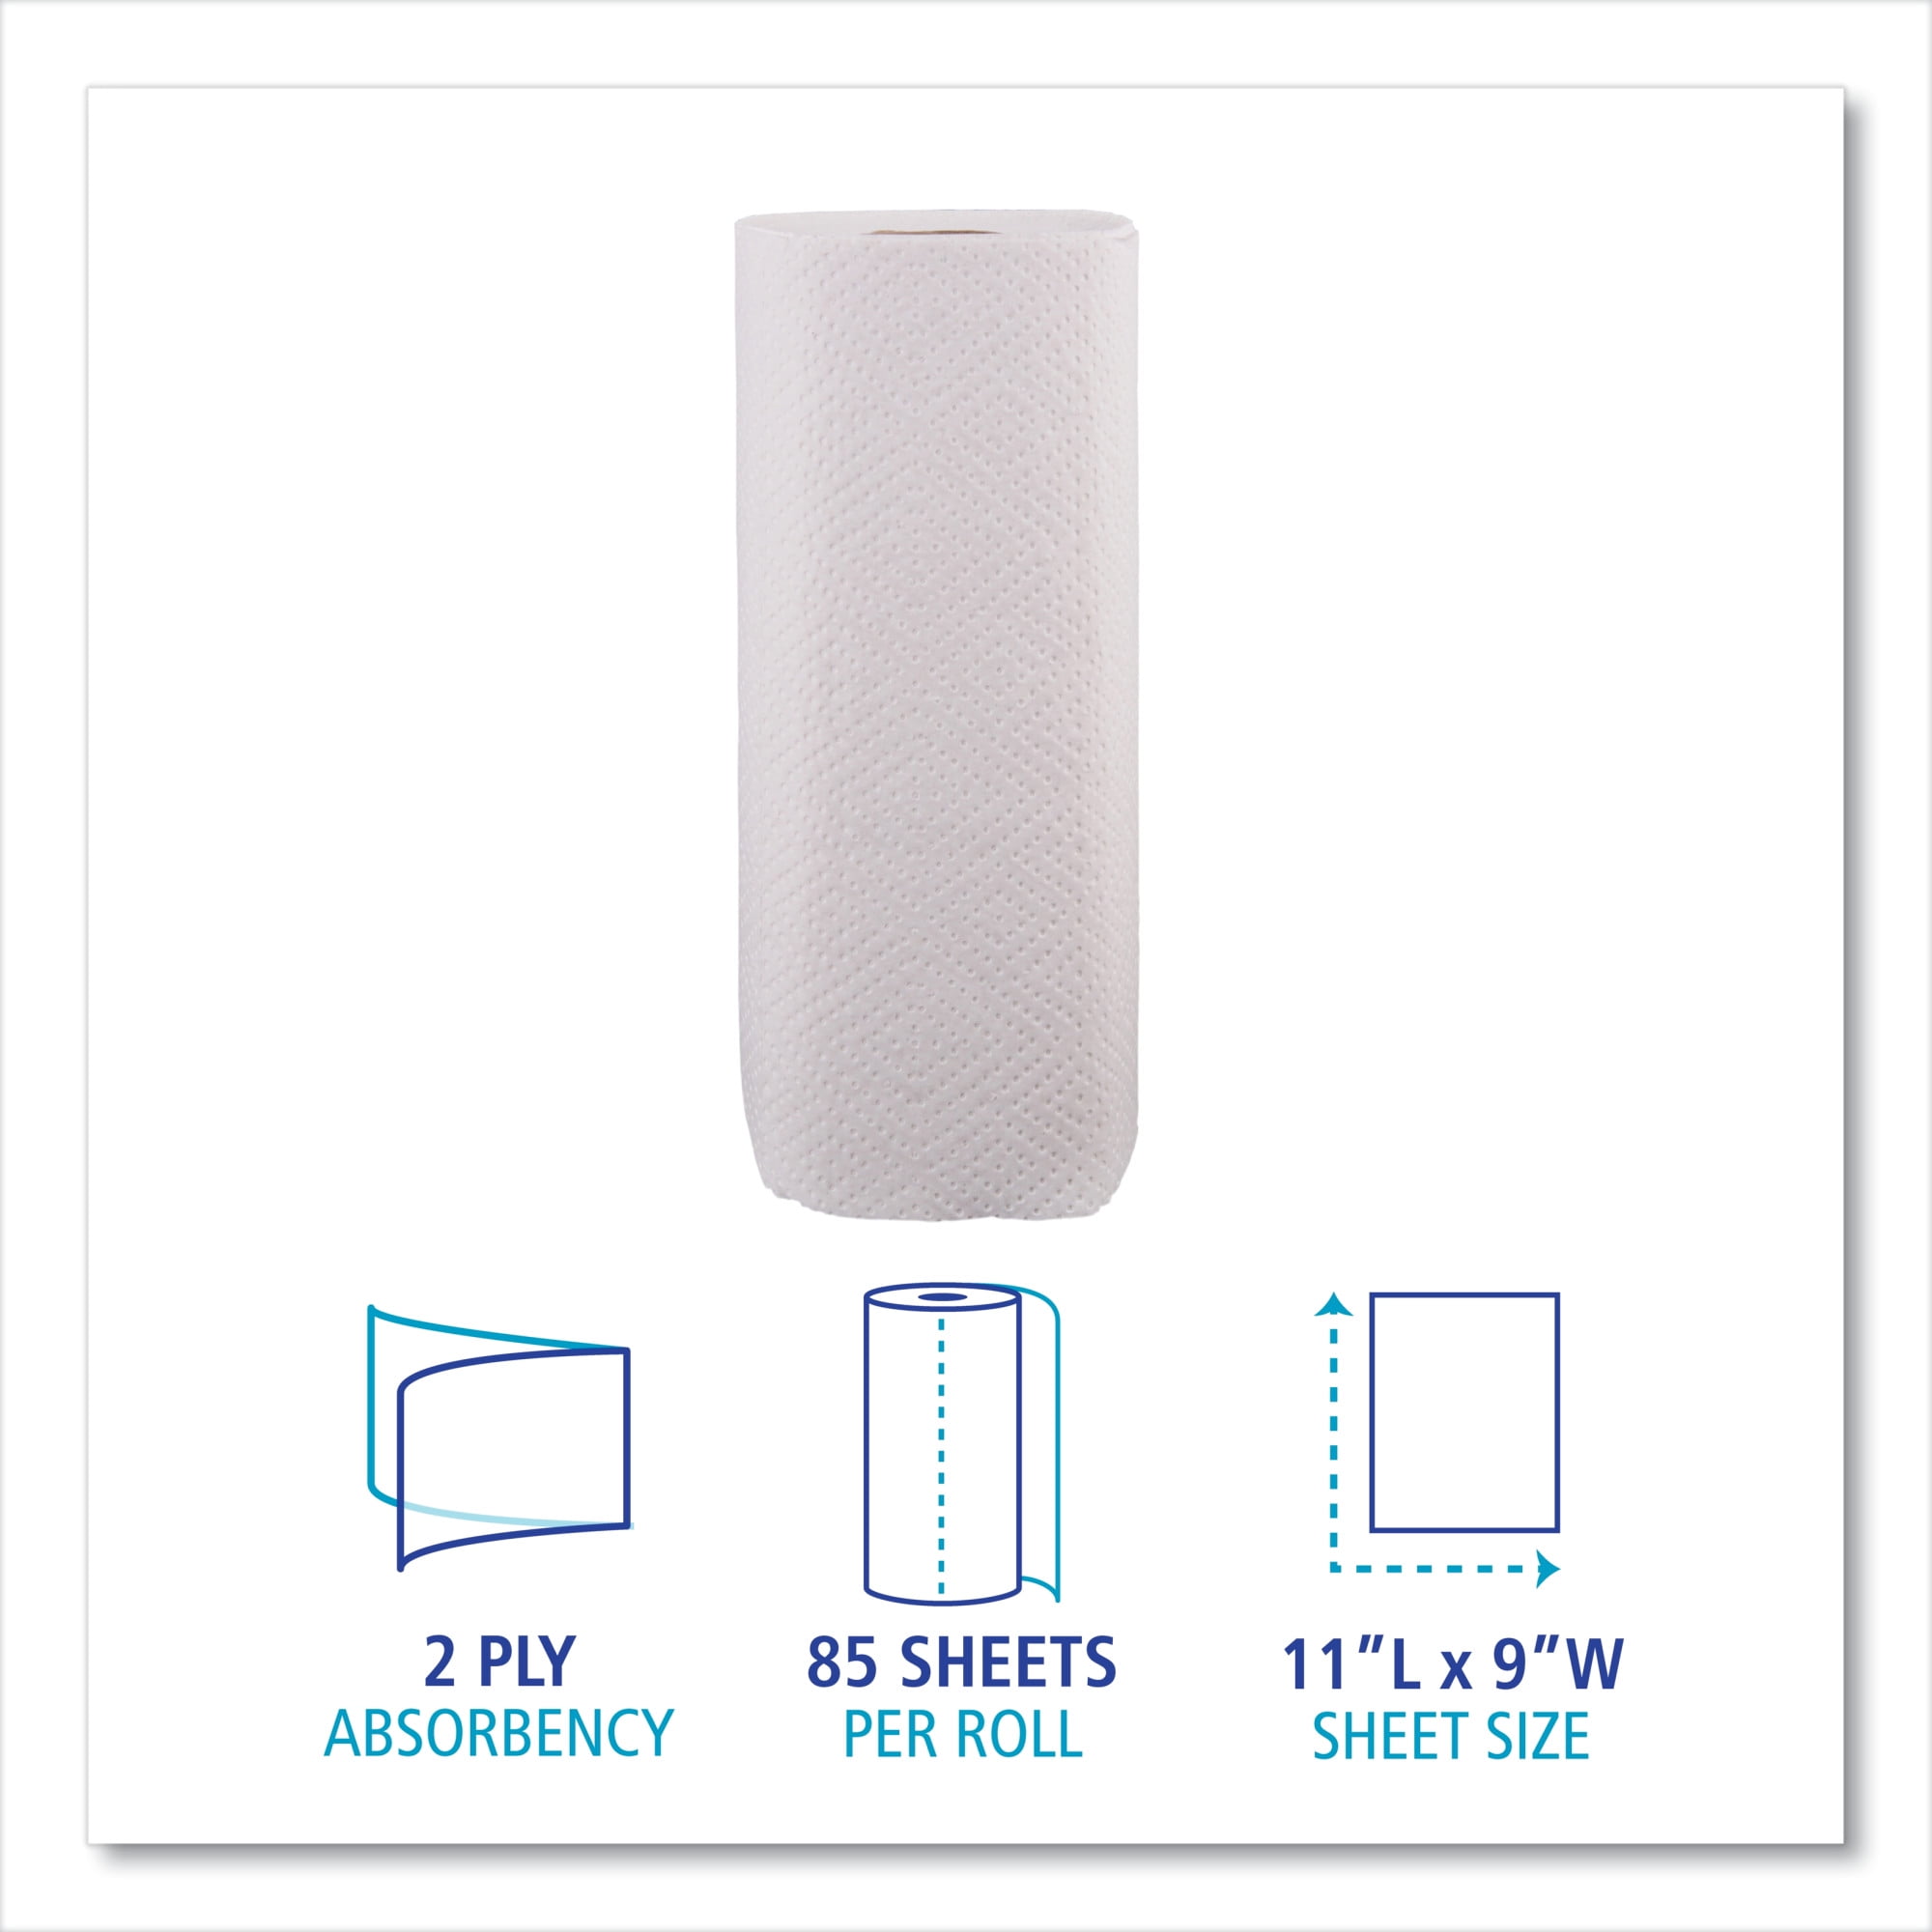 Quill Brand® Kitchen Paper Towels, 2-Ply, 85 Sheets/Roll, 30 Rolls/Carton  (7HH290)